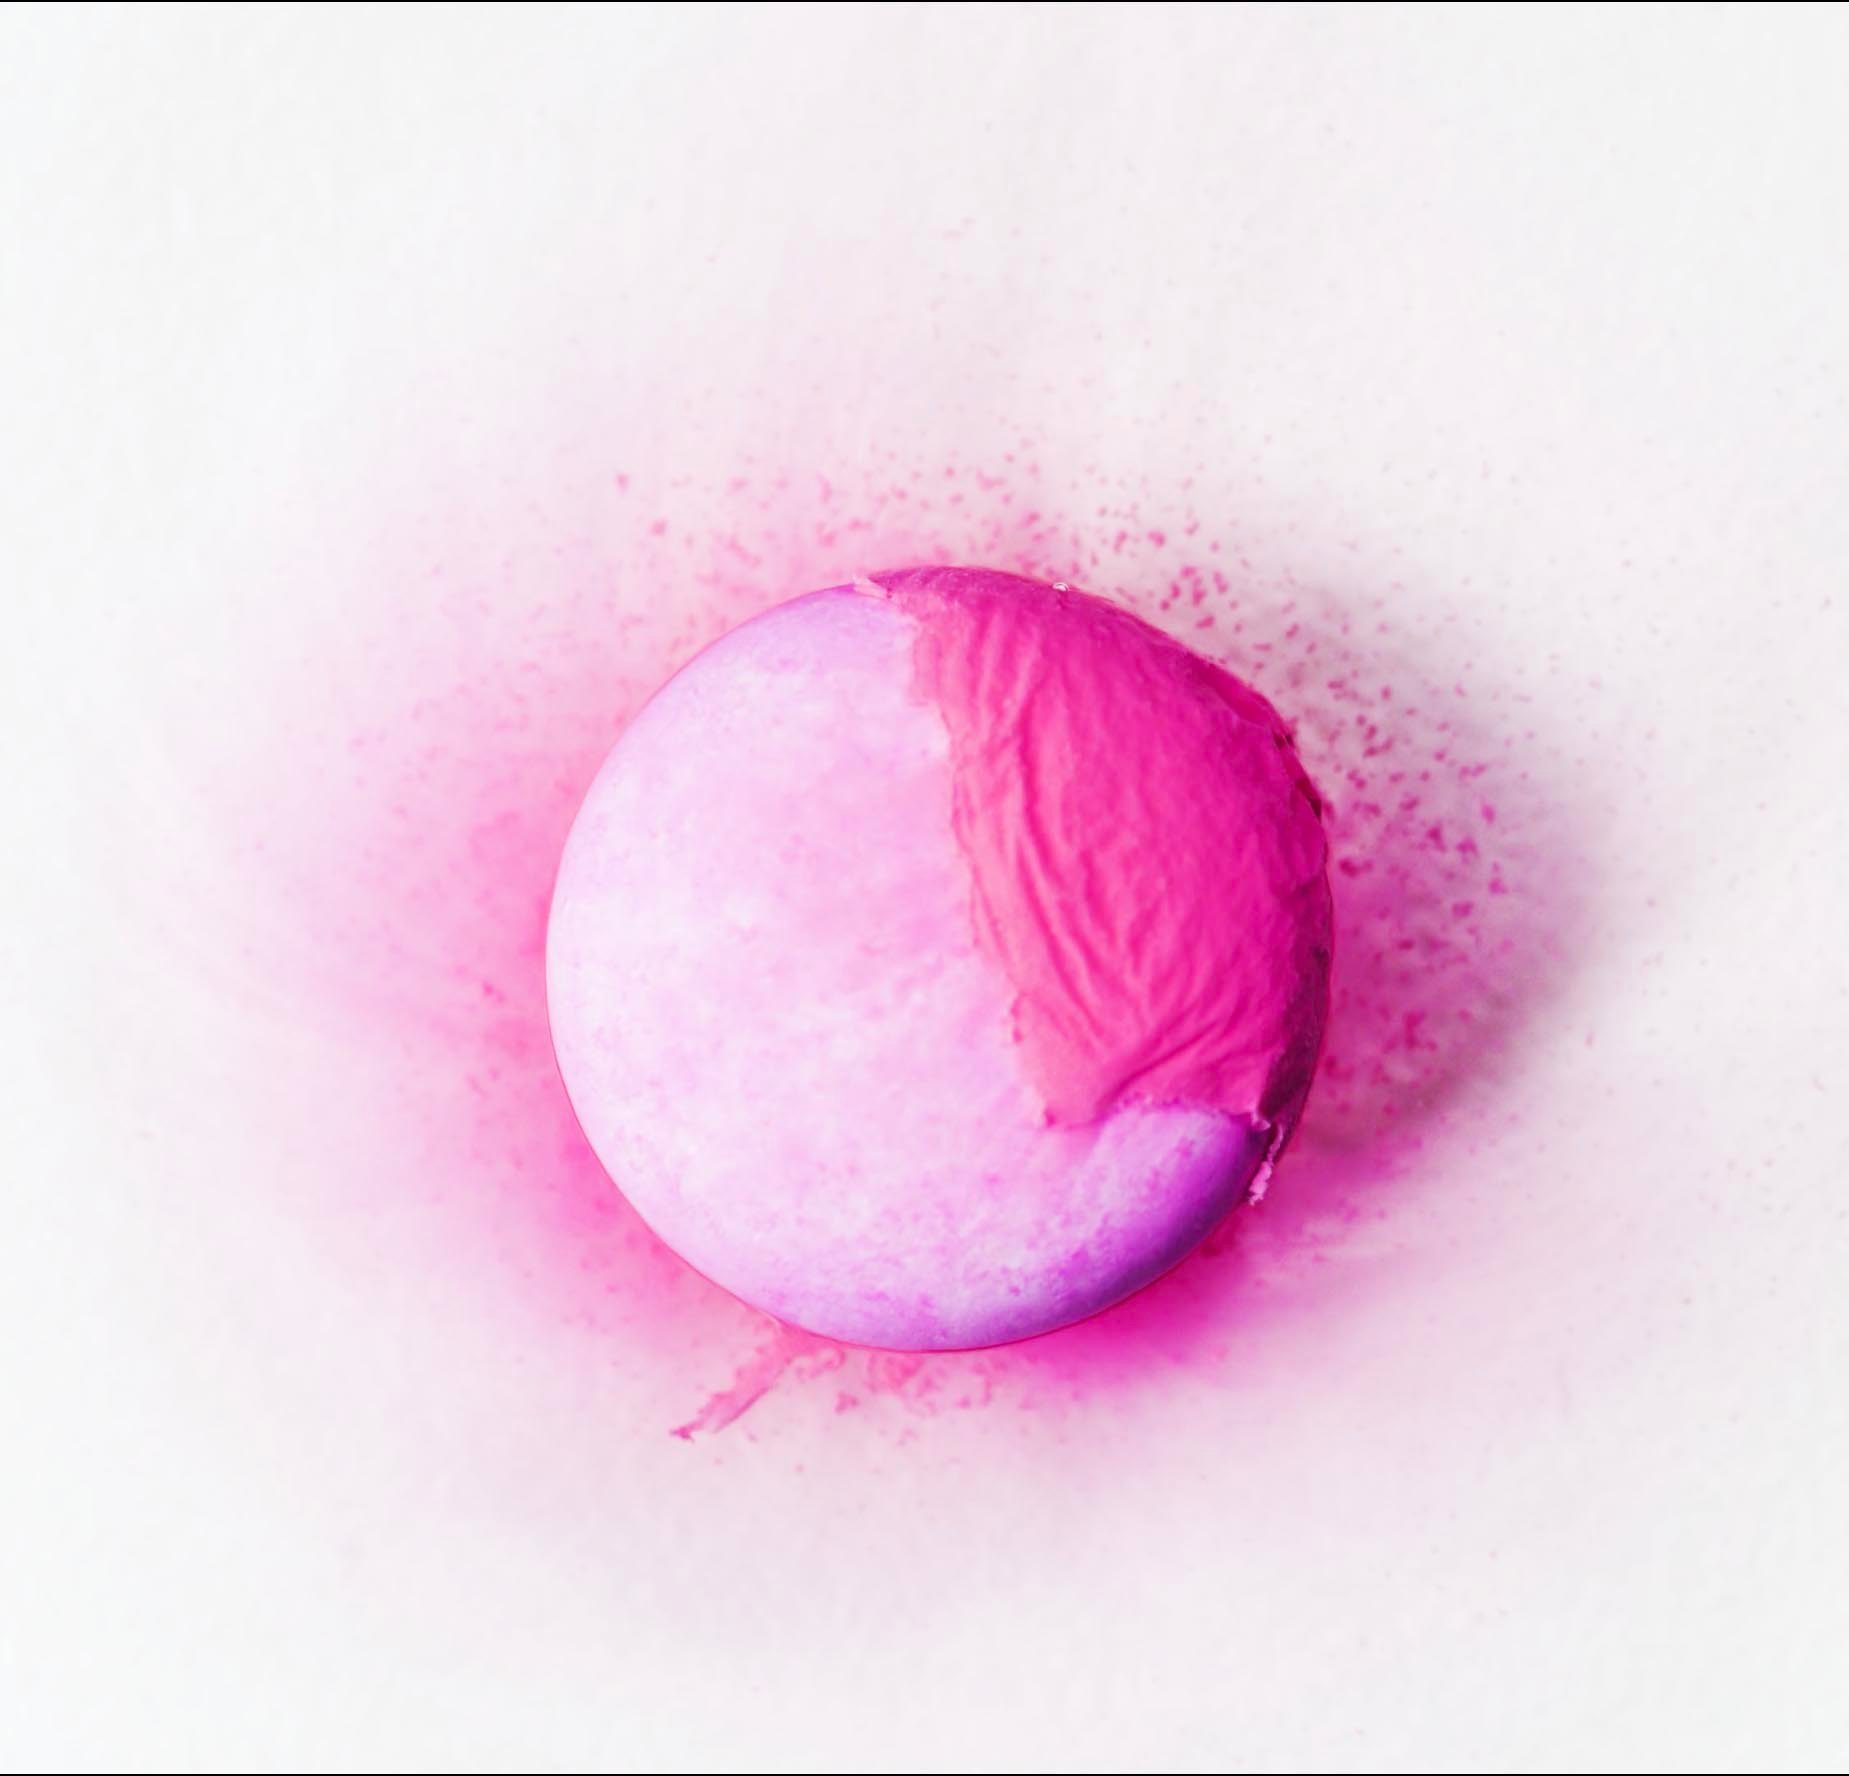 This image shows the dissolving of a pill for Make Medicine Work film 